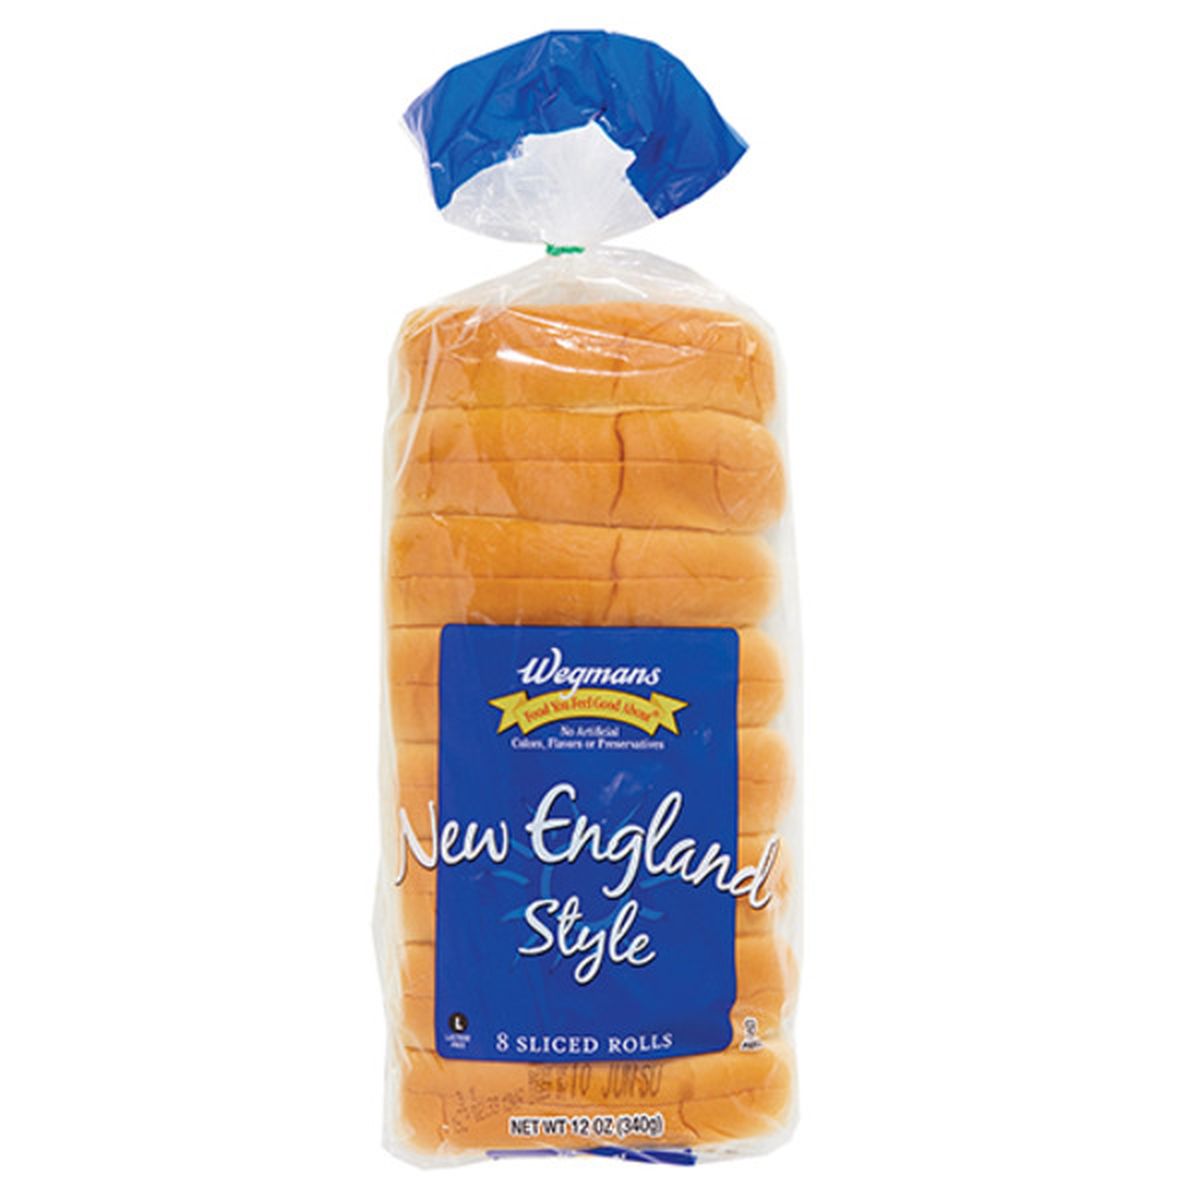 Calories in Wegmans New England Style Rolls, 8 Pack